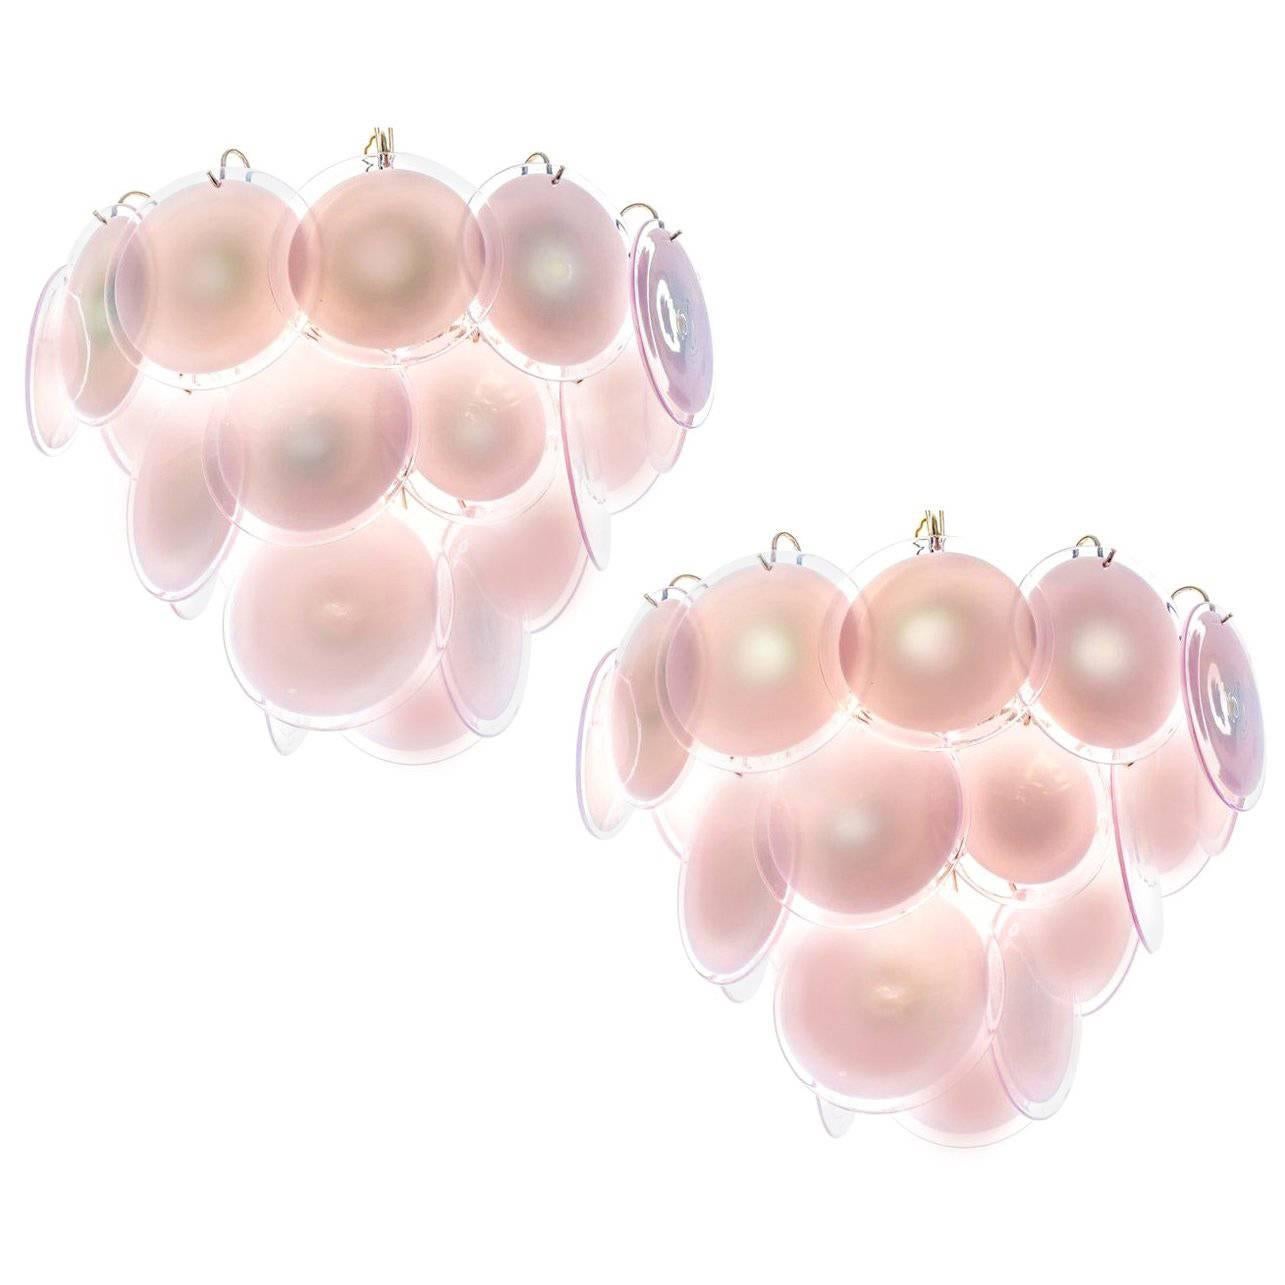 Spectacular pair of chandeliers by Vistosi made in Murano. Each chandelier is formed by 24 pink discs of precious Murano glass are arranged on floor levels. Nine lights. Measures: Height without chain 50 cm. Available also with white discs.
 